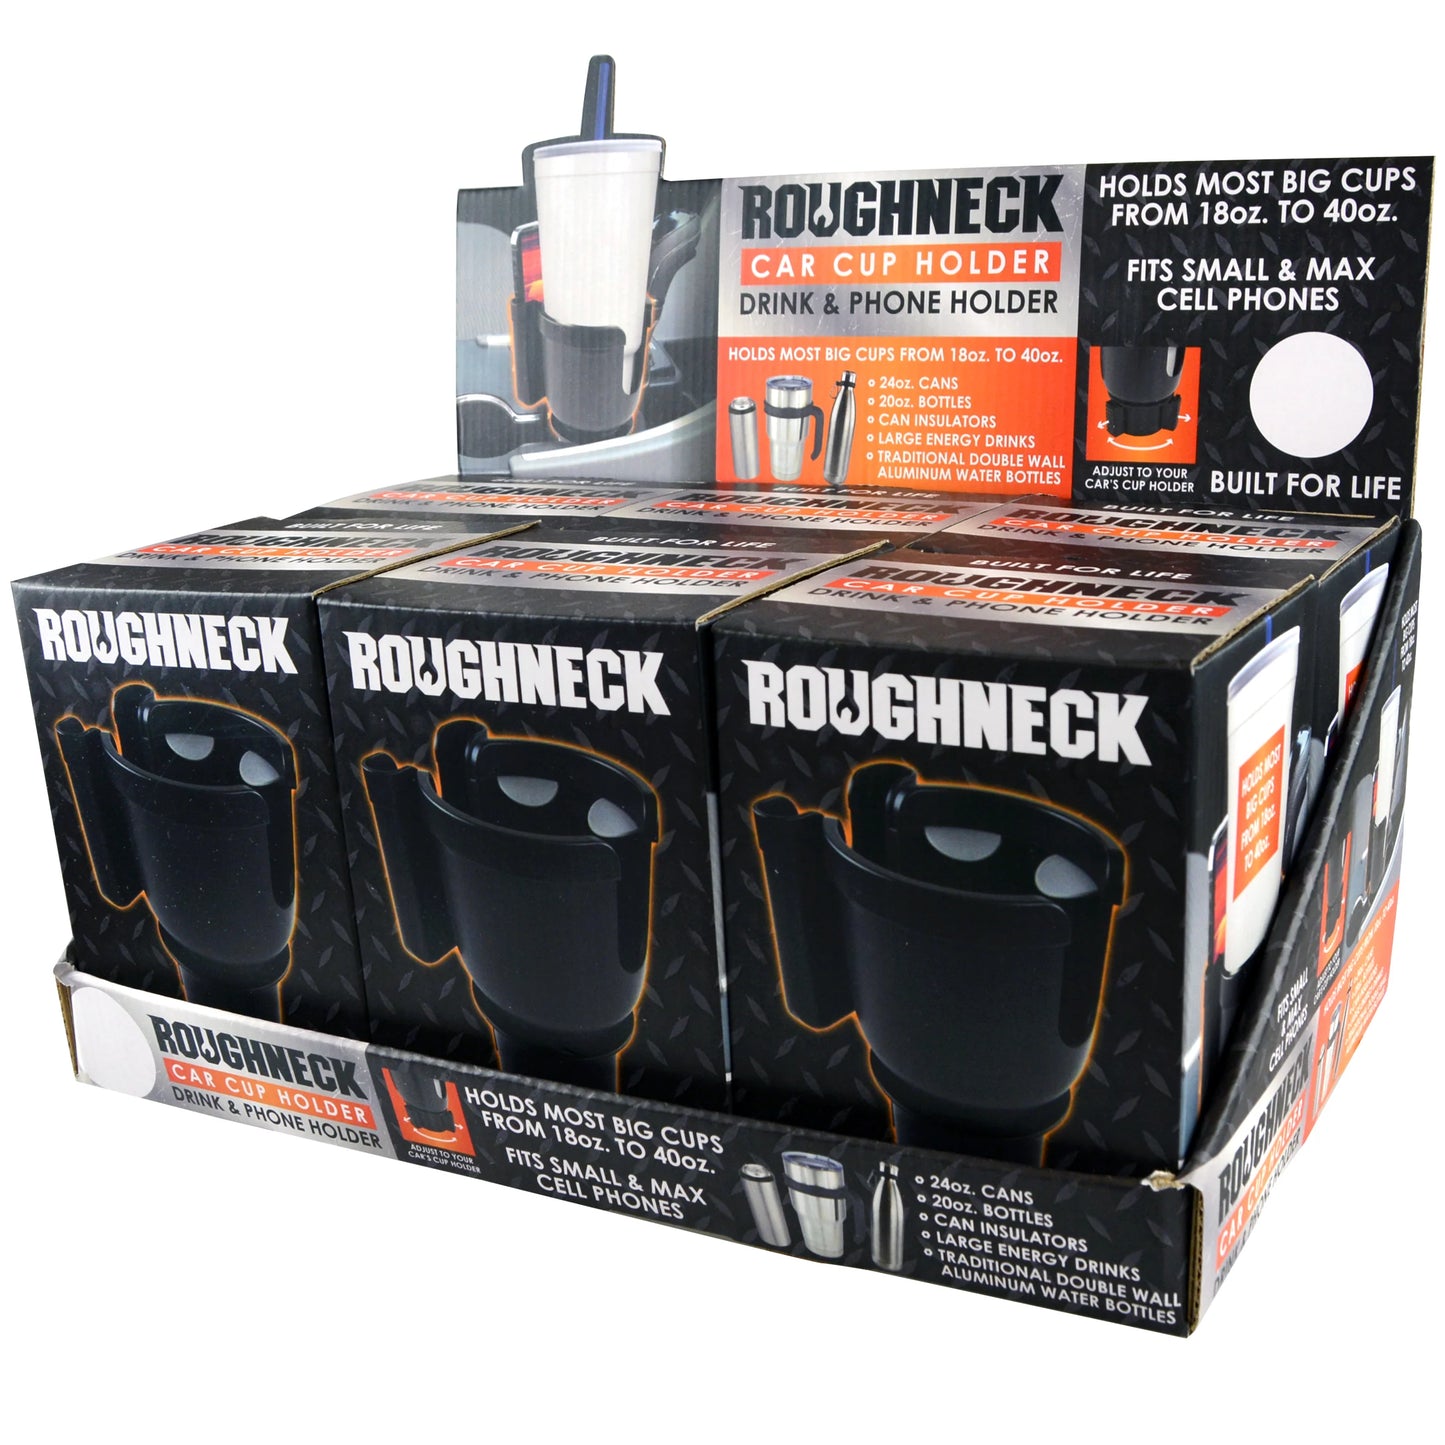 ROUGHNECK CUP CELL PHONE HOLDER